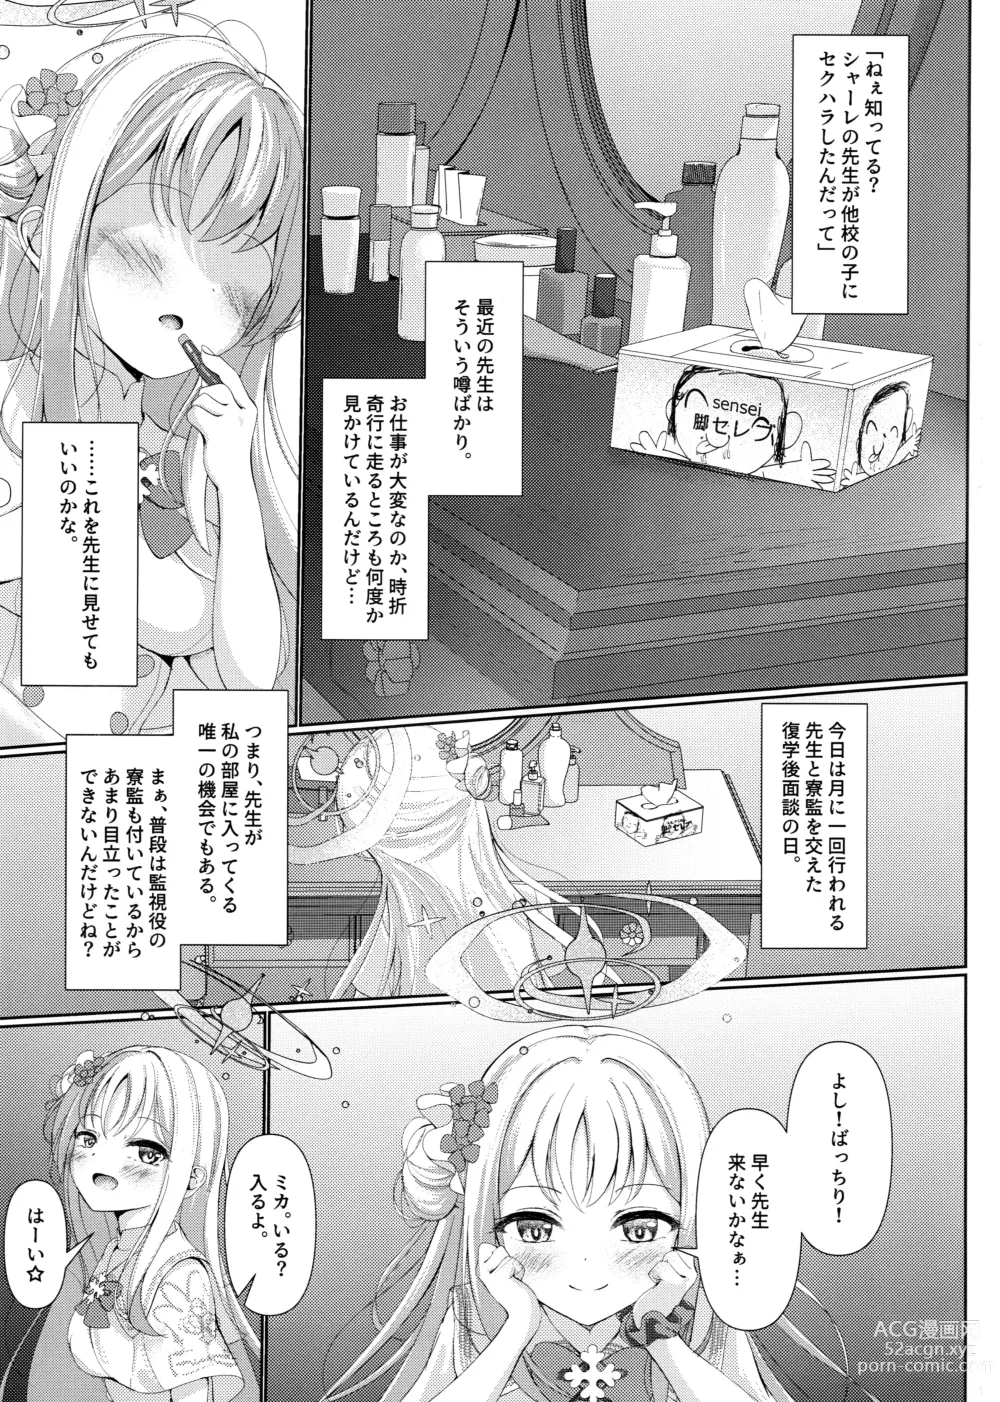 Page 2 of doujinshi Sleeping with the Dear Constellation.